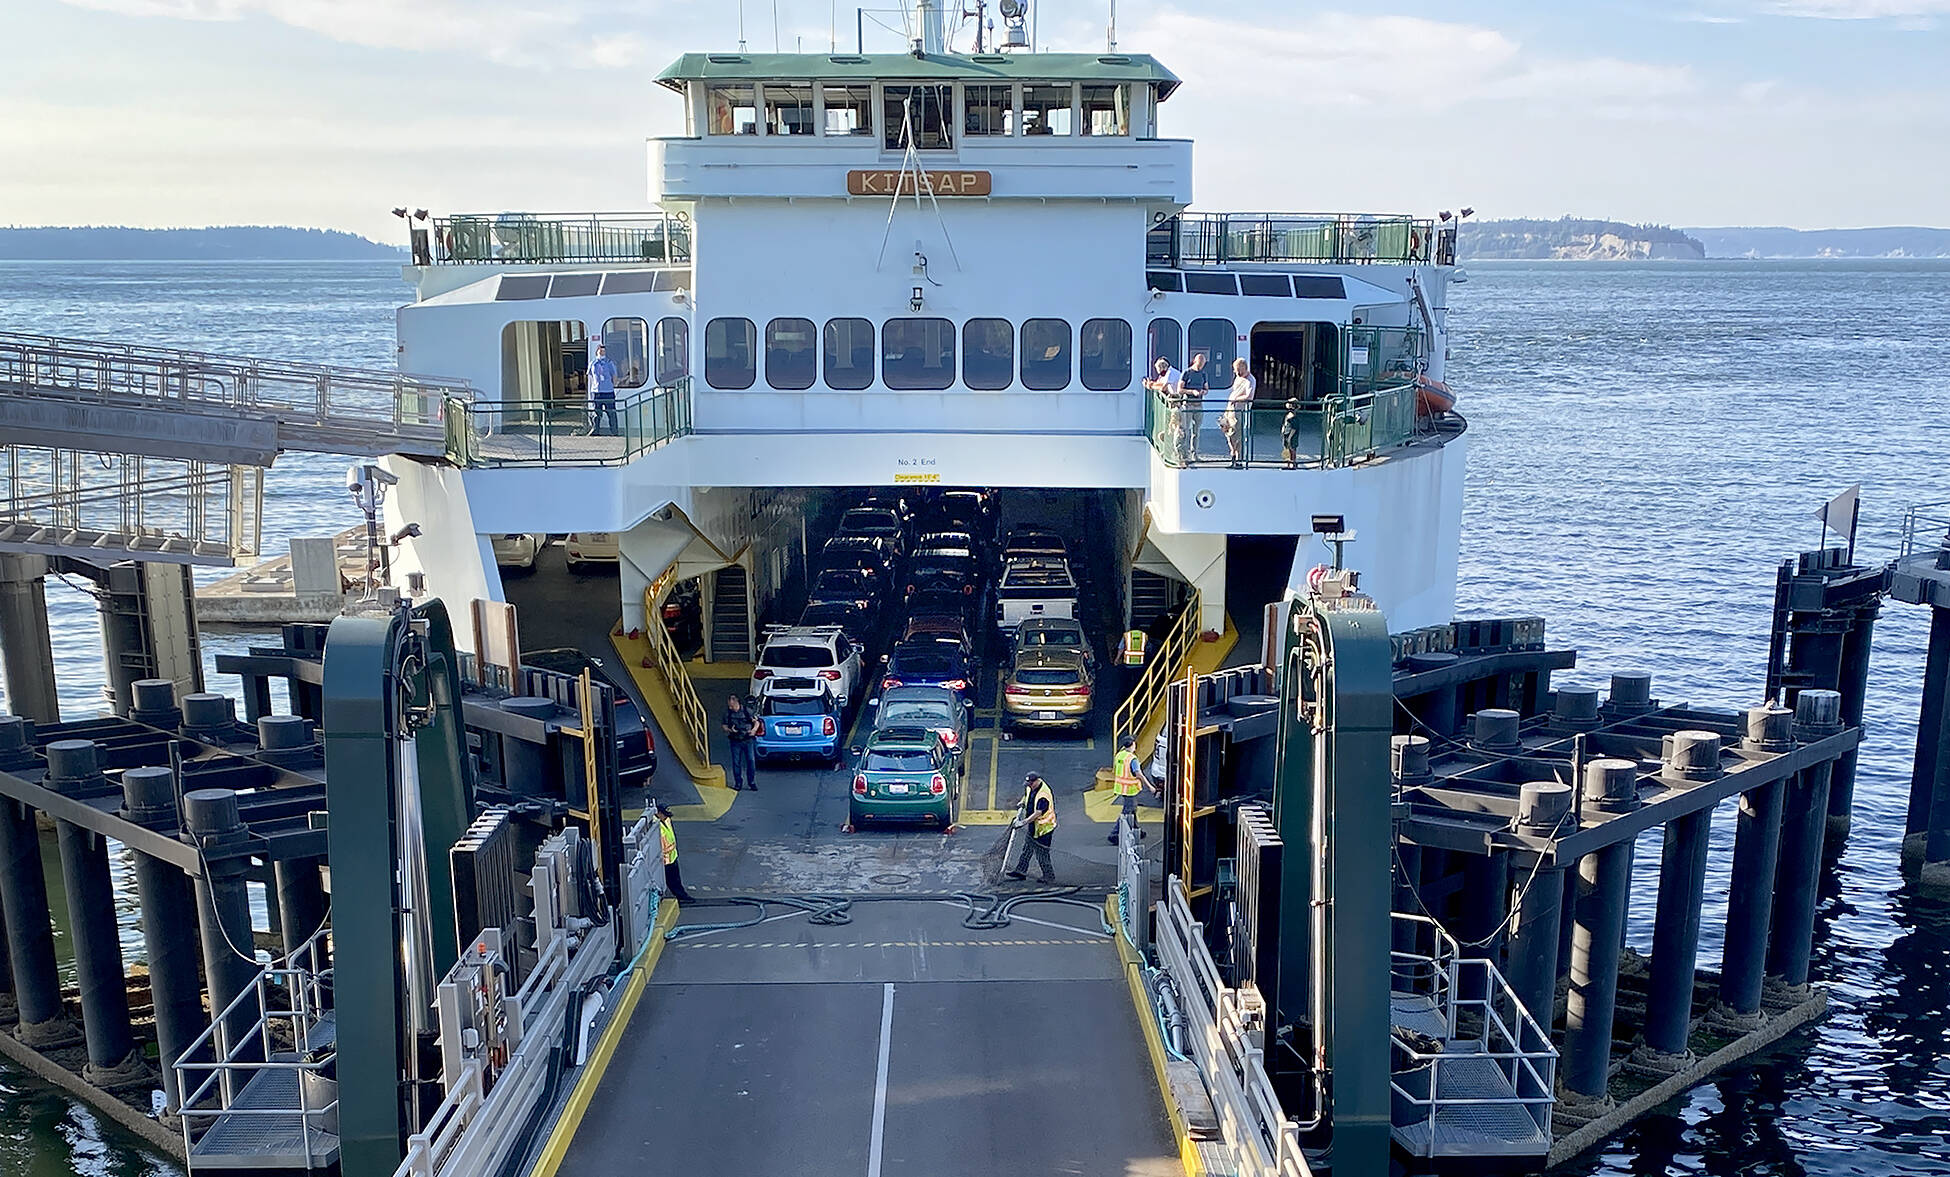 The Kitsap prepares to make a crossing from Mukilteo to Clinton. (Sue Misao / Herald file)